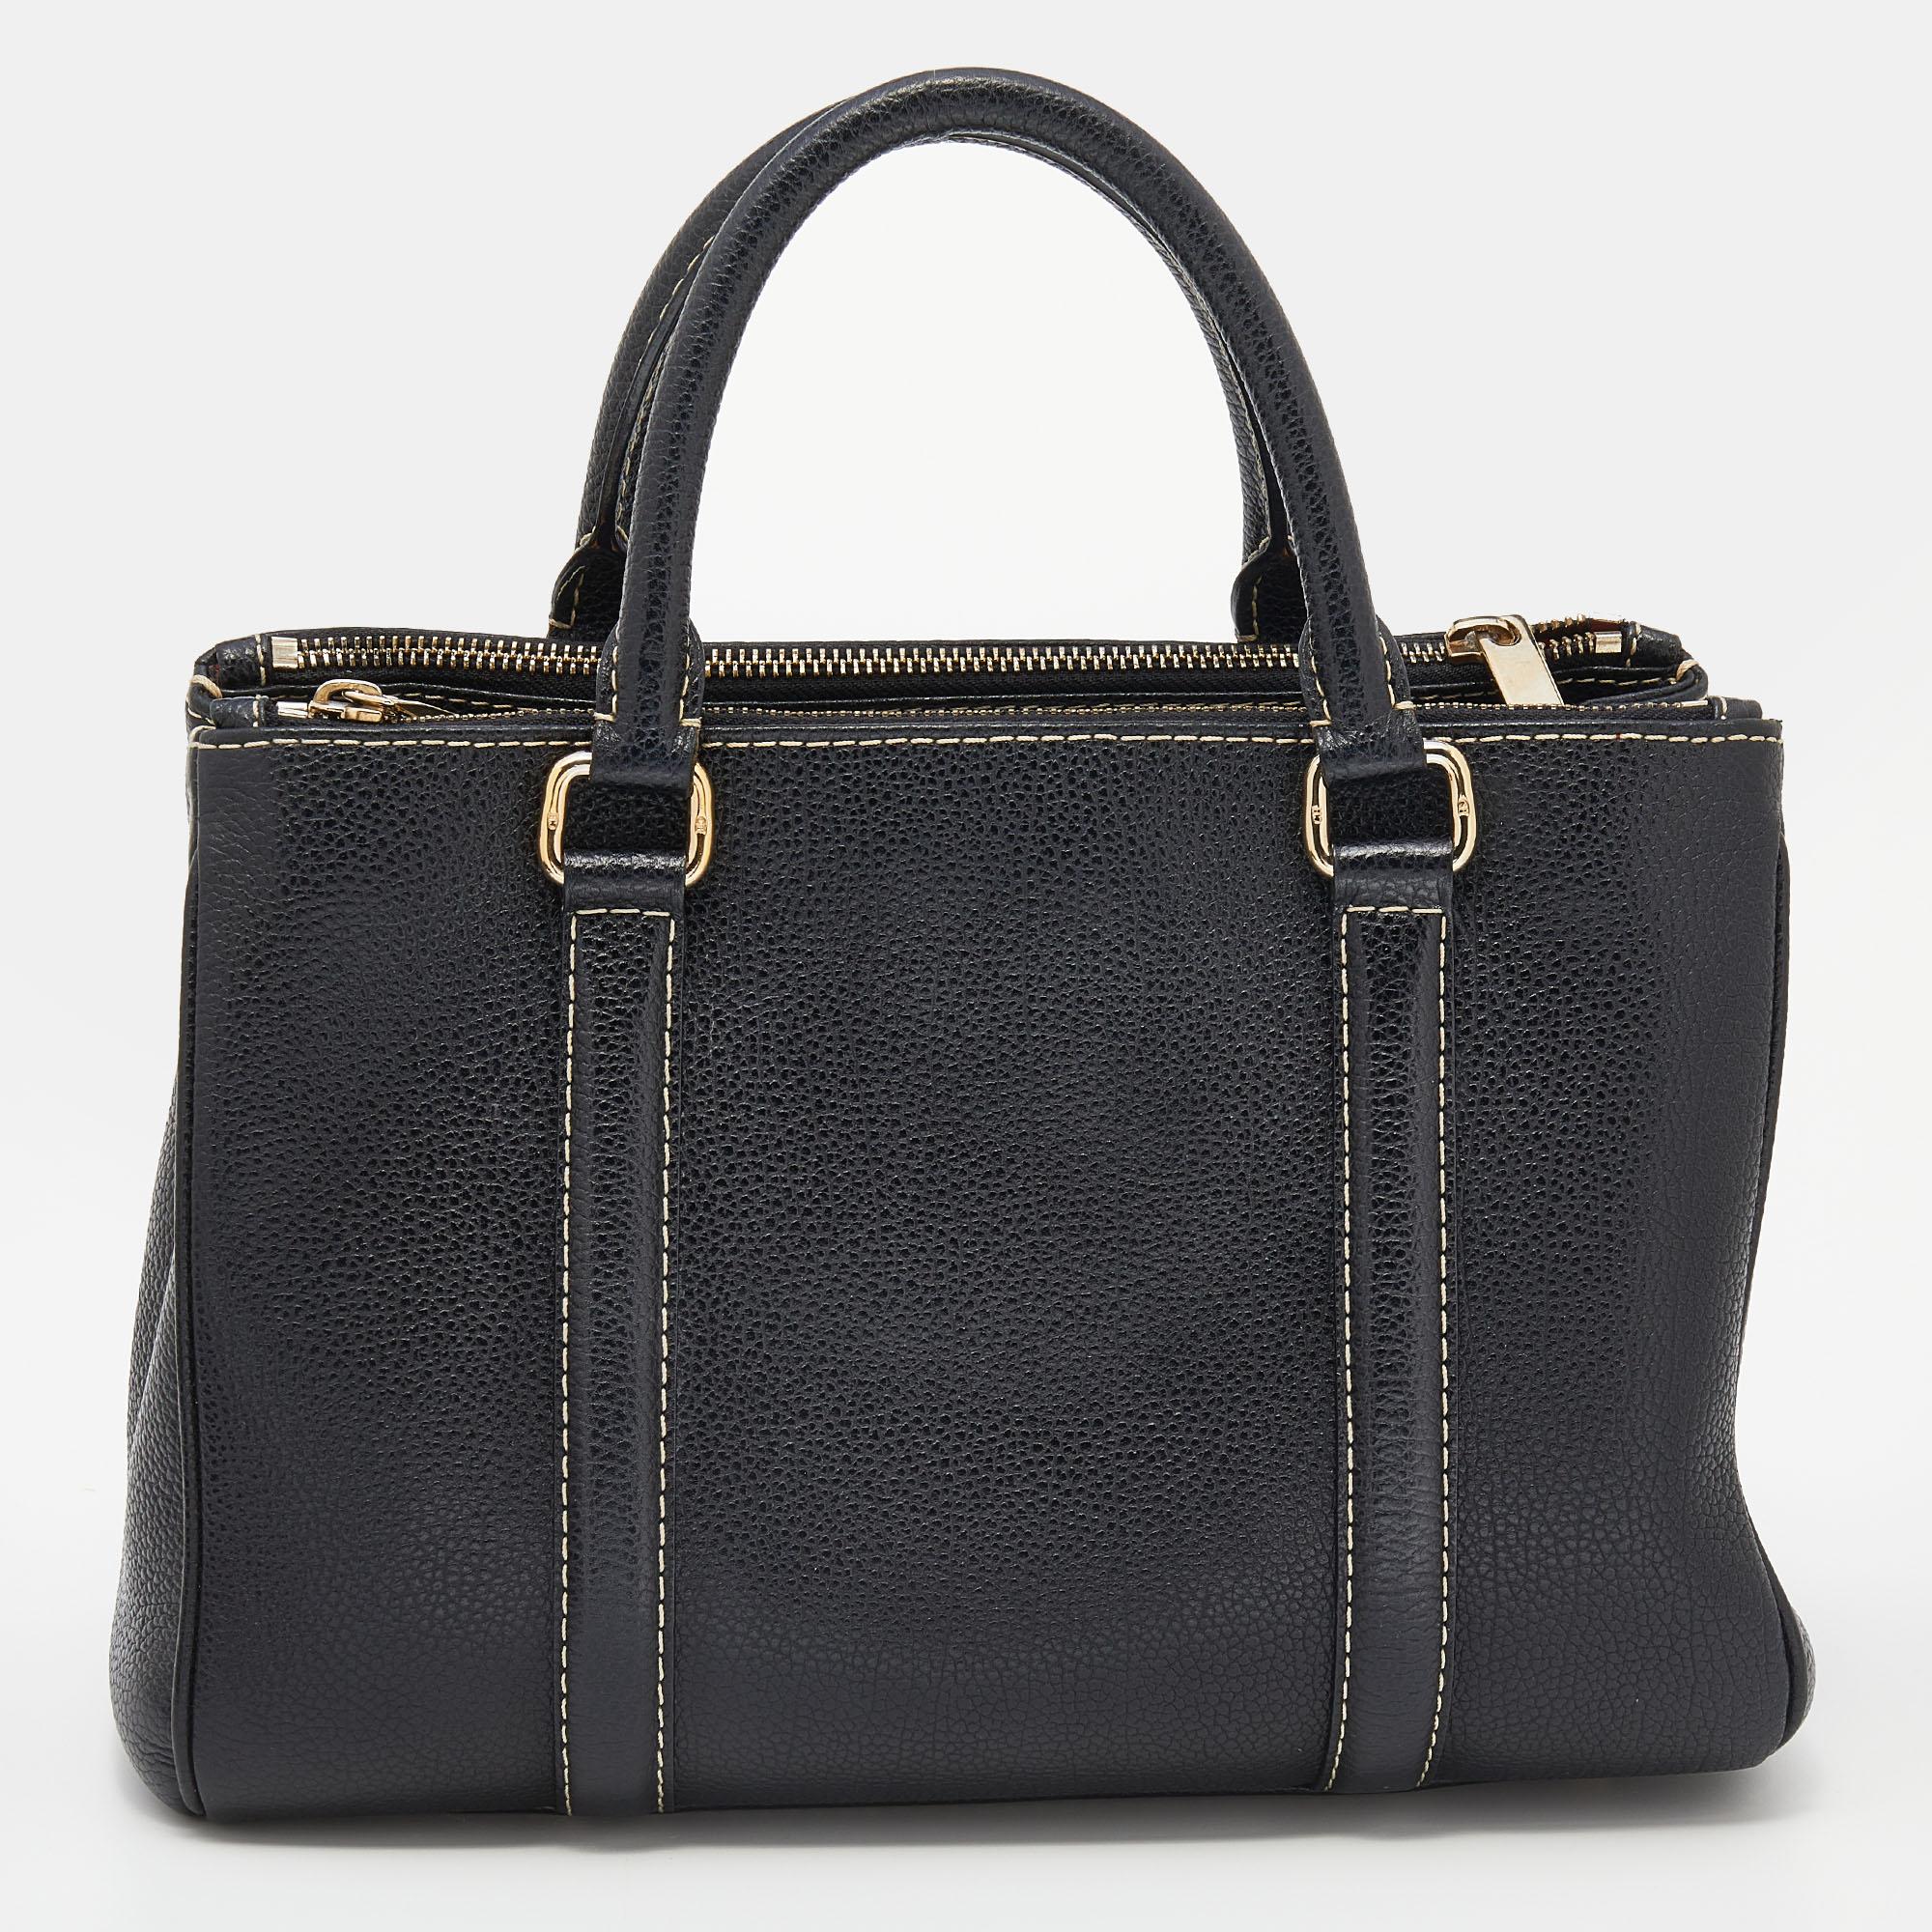 A CH Carolina Herrera tote should definitely be a part of your wardrobe. Crafted from black leather, this piece is sure to enhance your casual or work look. It has two handles, the logo at the front, gleaming gold-tone hardware, and a spacious